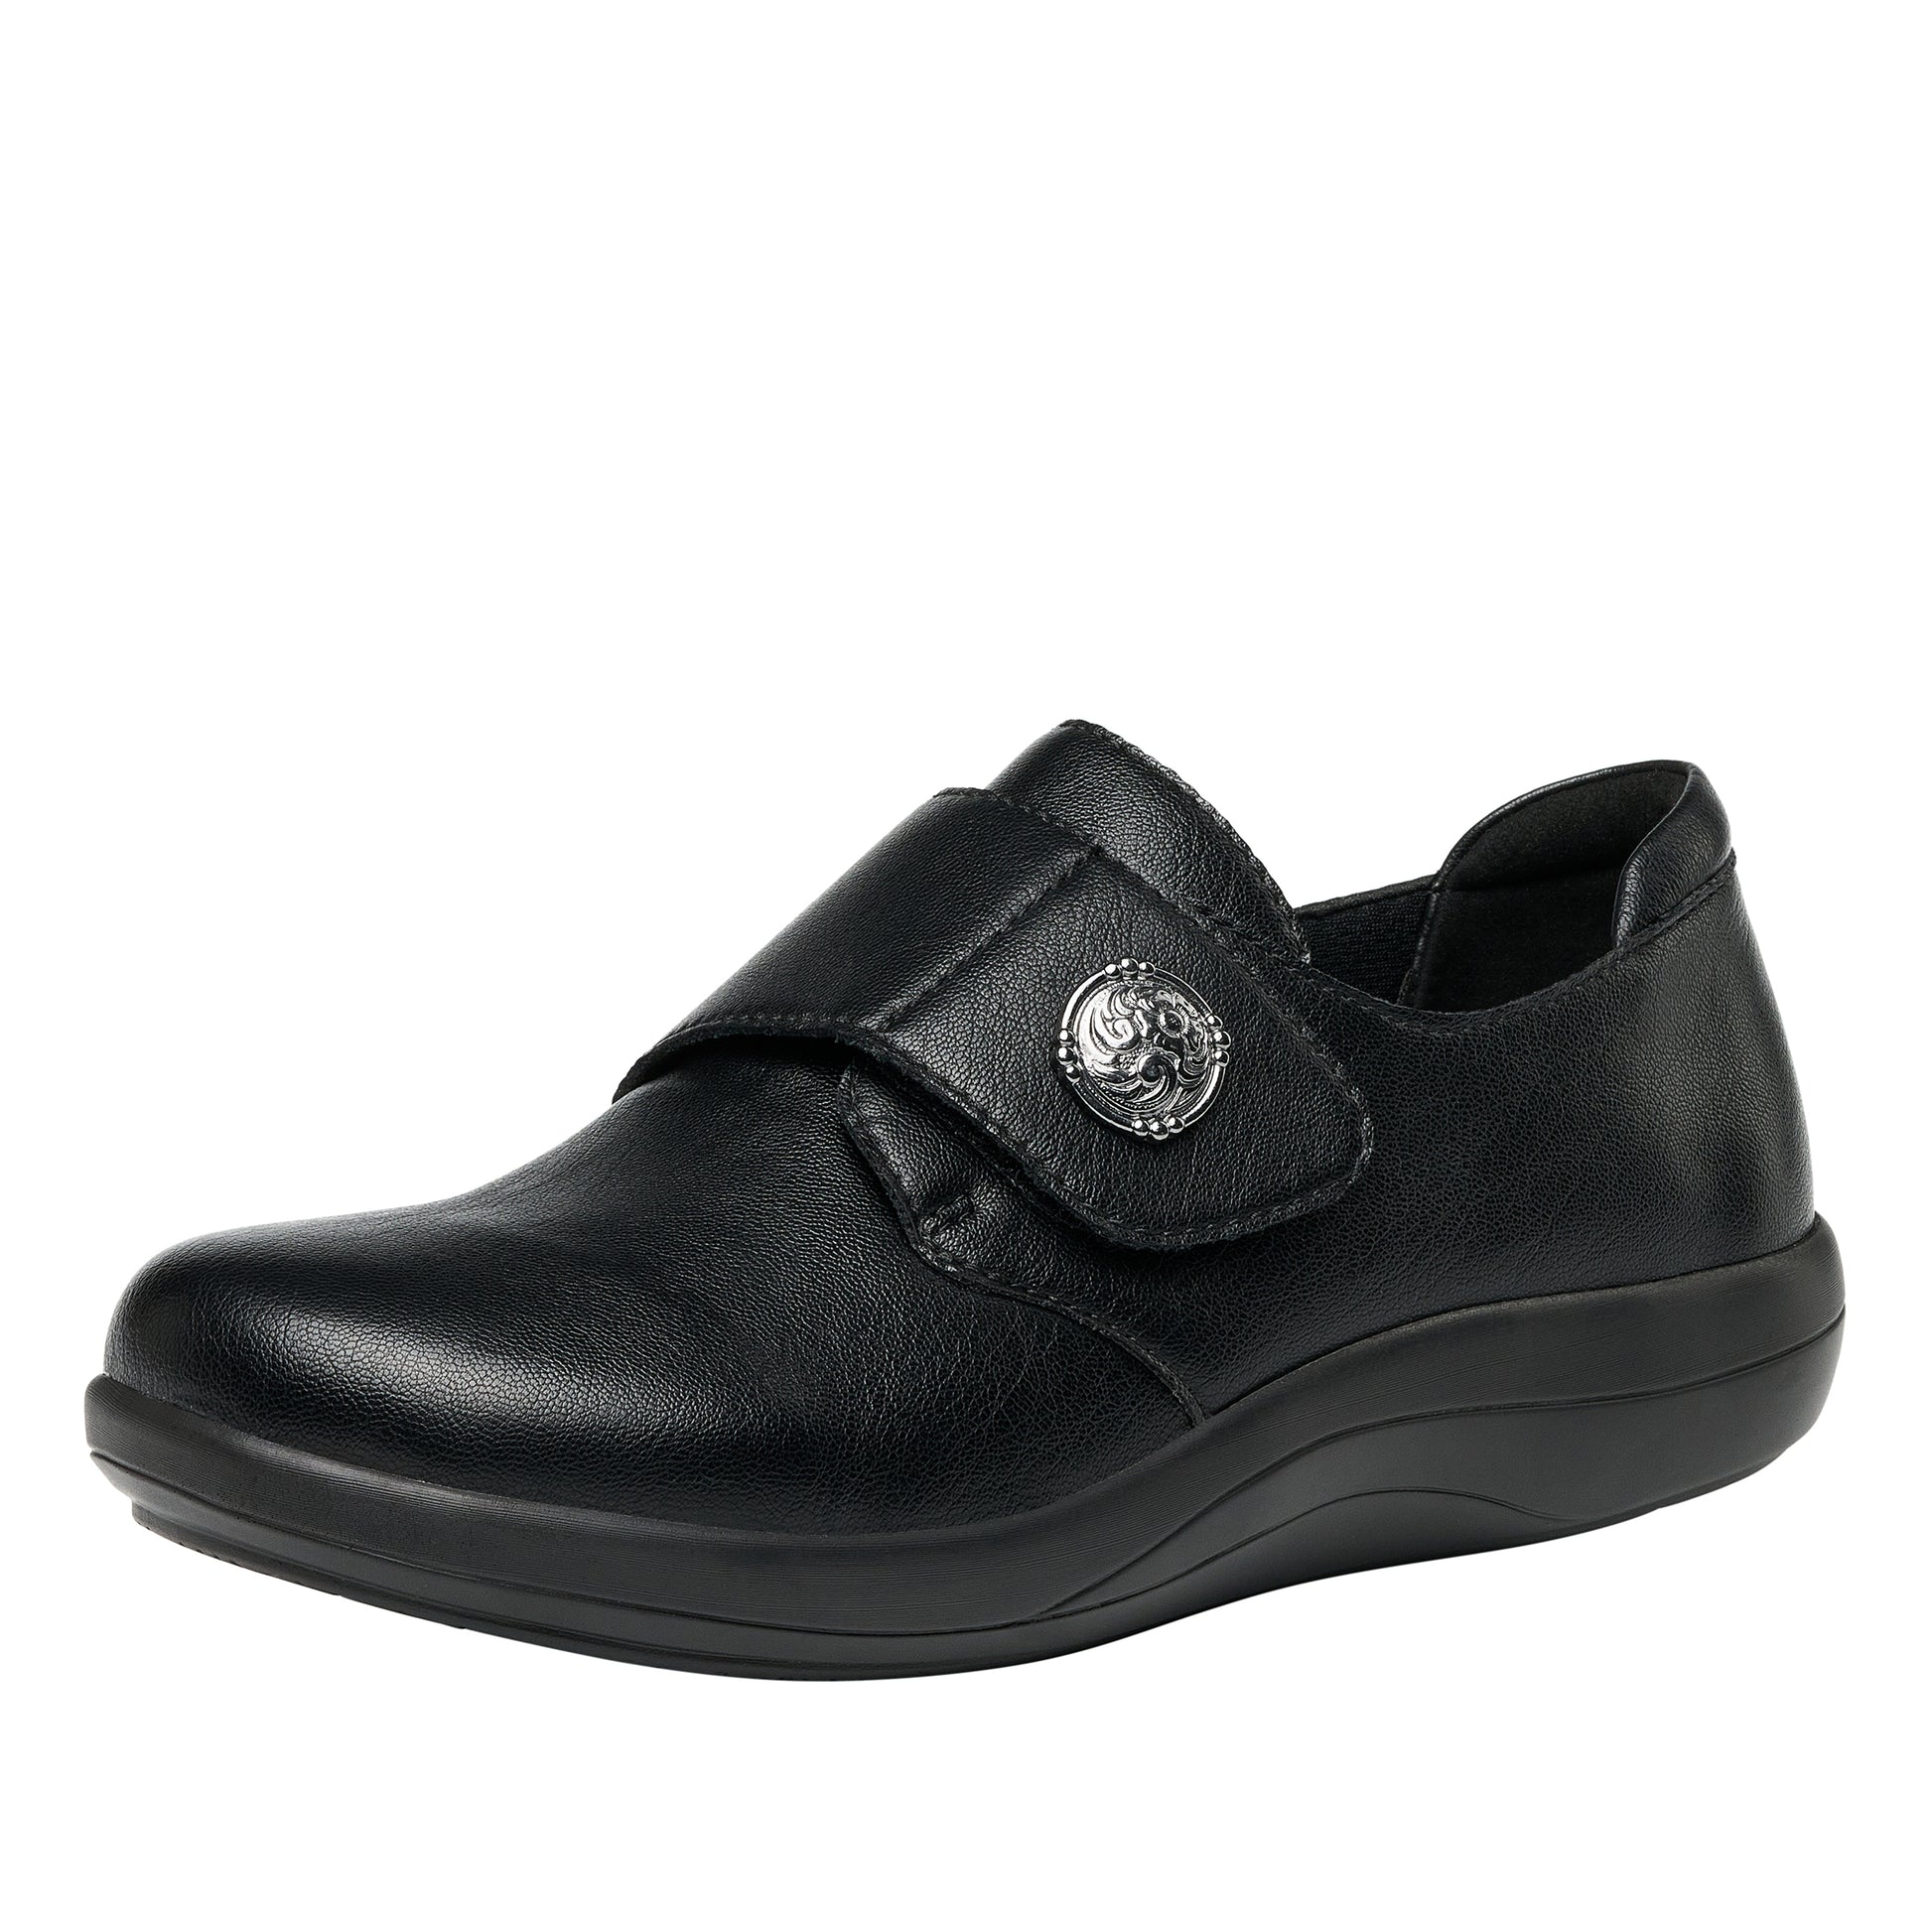 Alegria Spright Black Smooth Shoe at Parker's Clothing and Shoes.